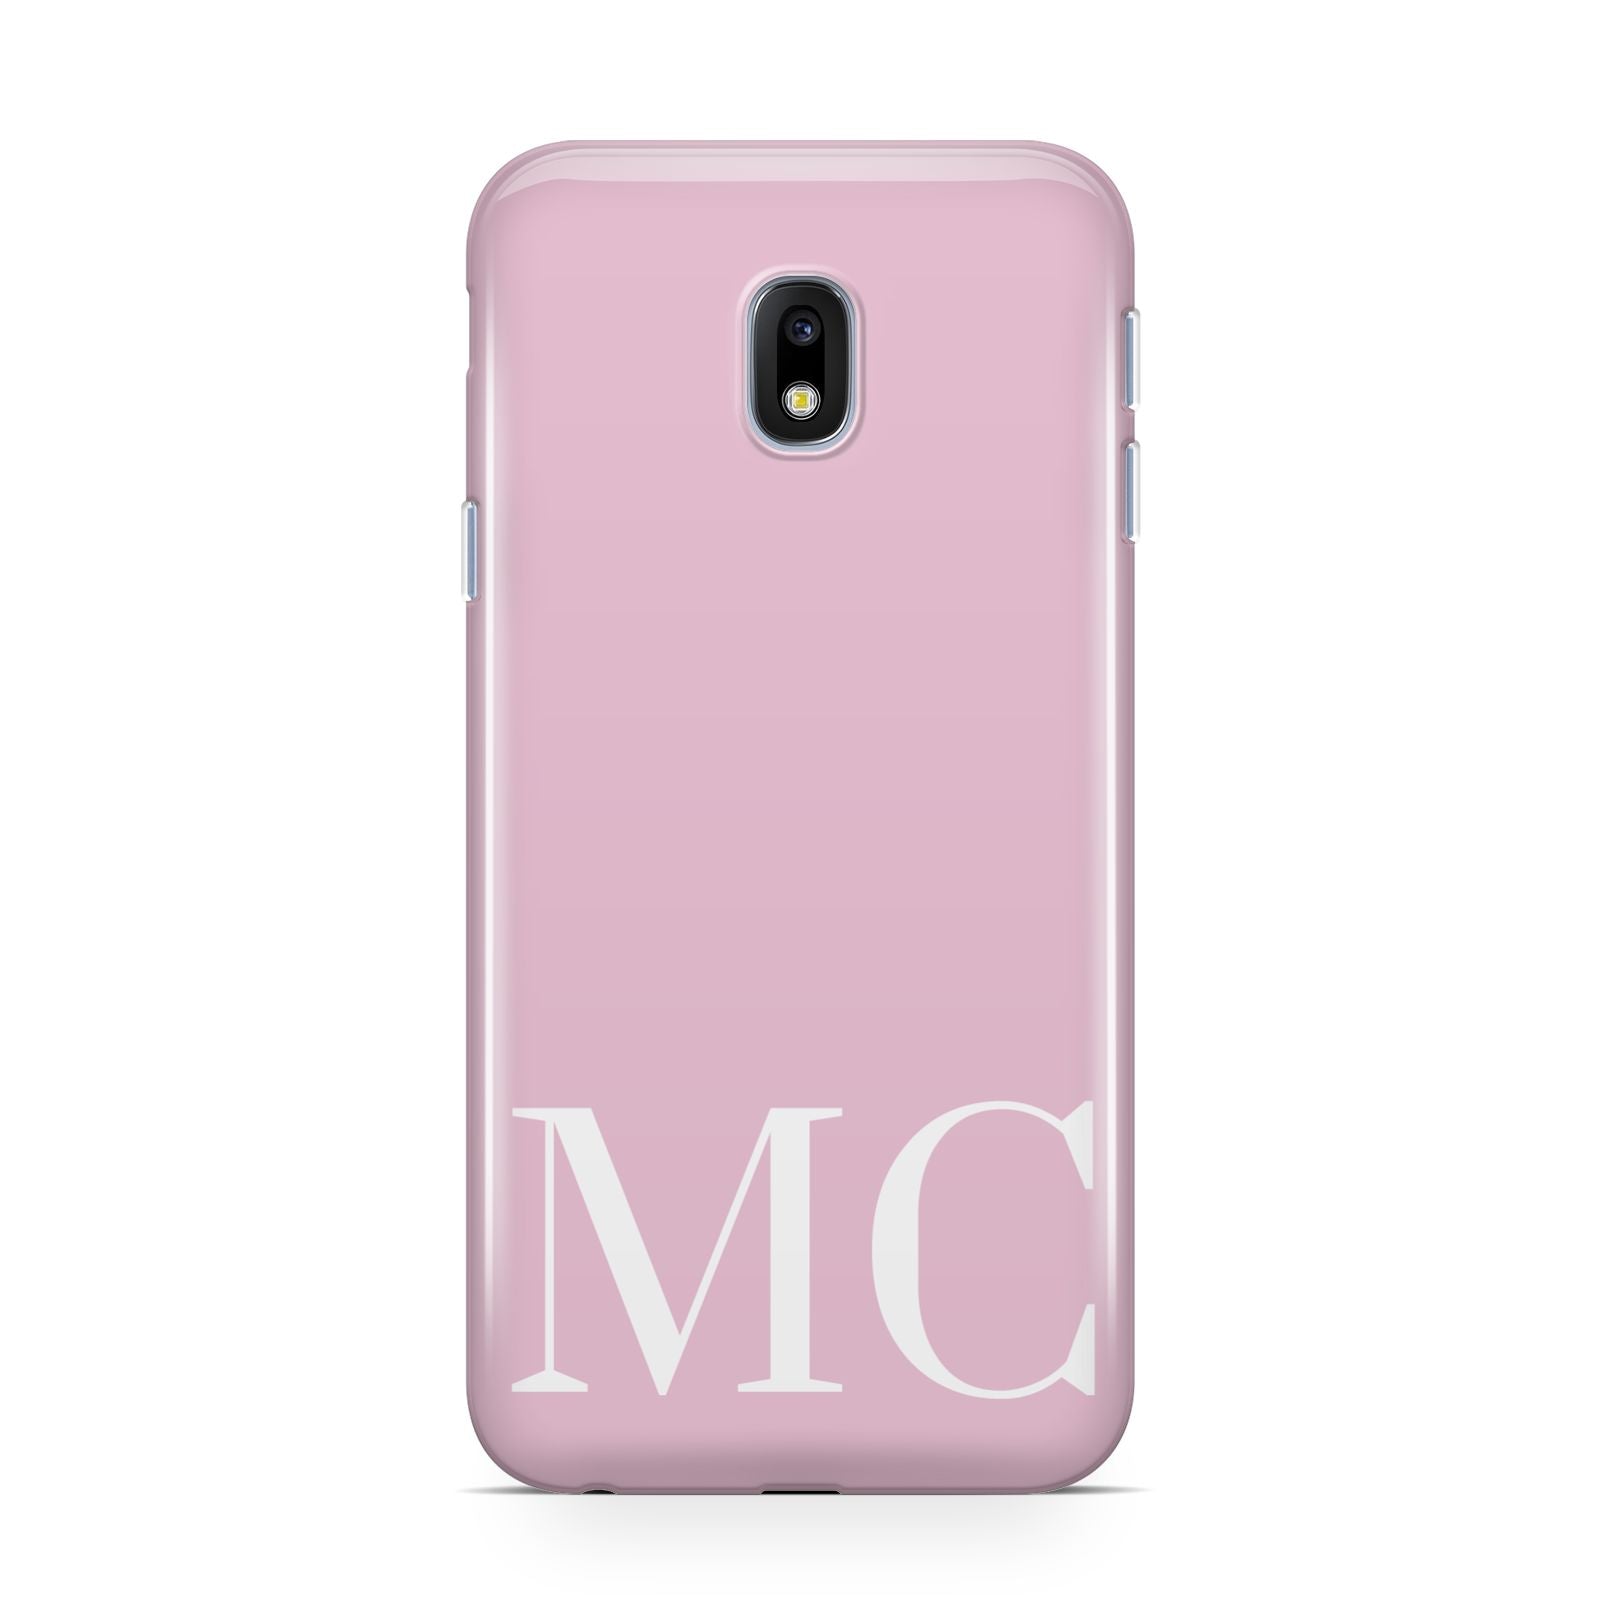 Initials Personalised 2 Samsung Galaxy J3 2017 Case